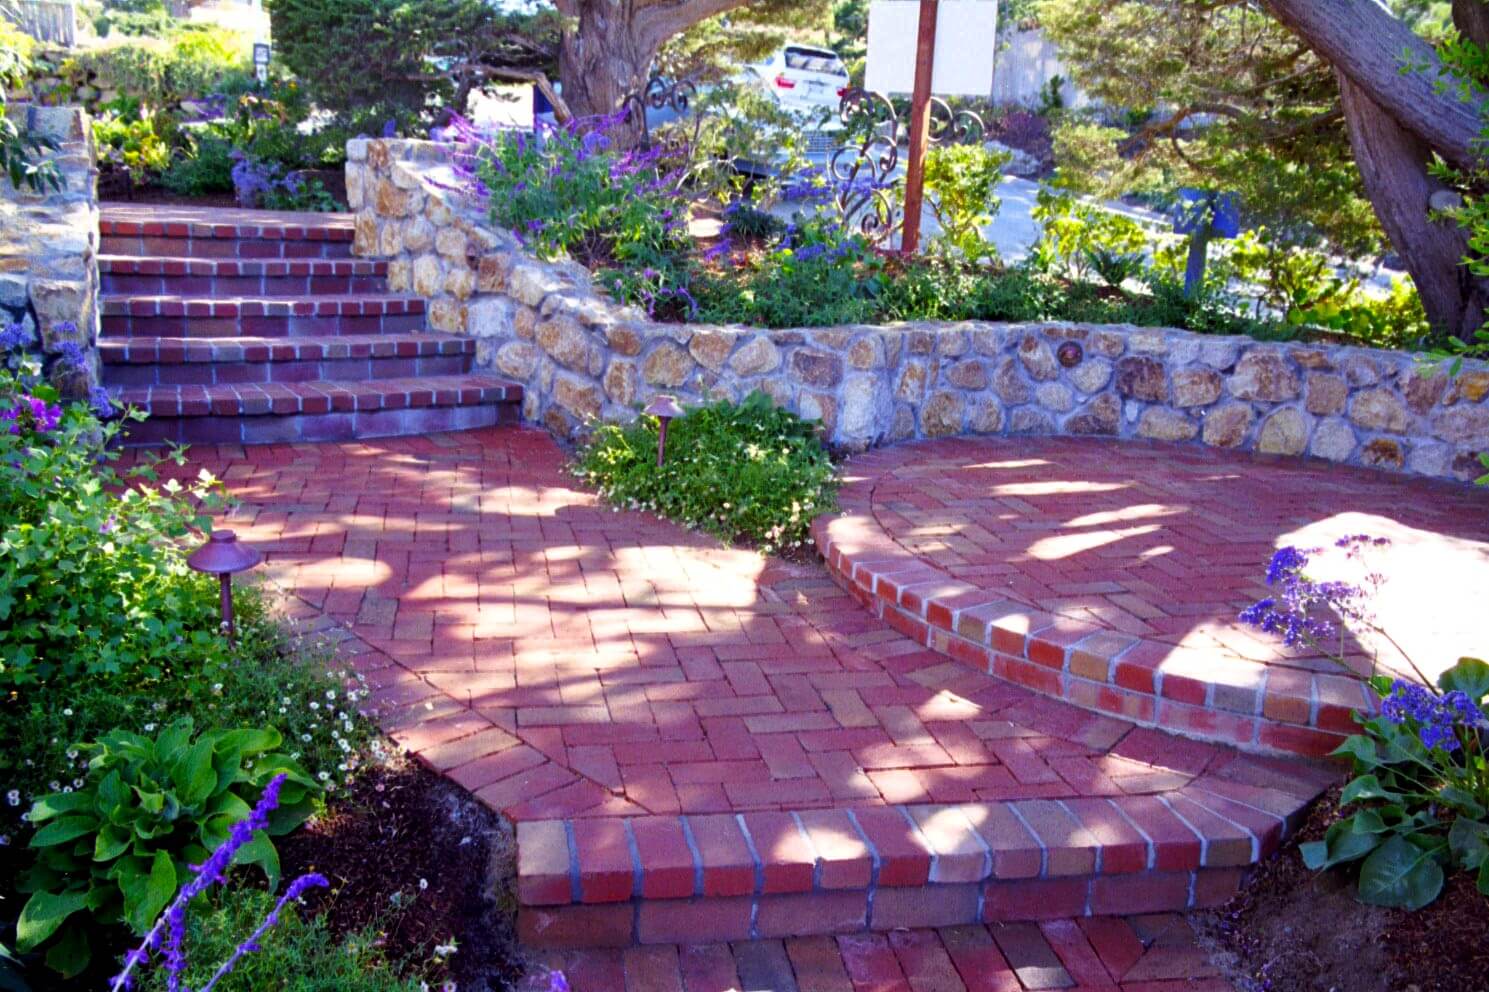 Custom brick stairs with stacked stone wall surround and round terraced seating area